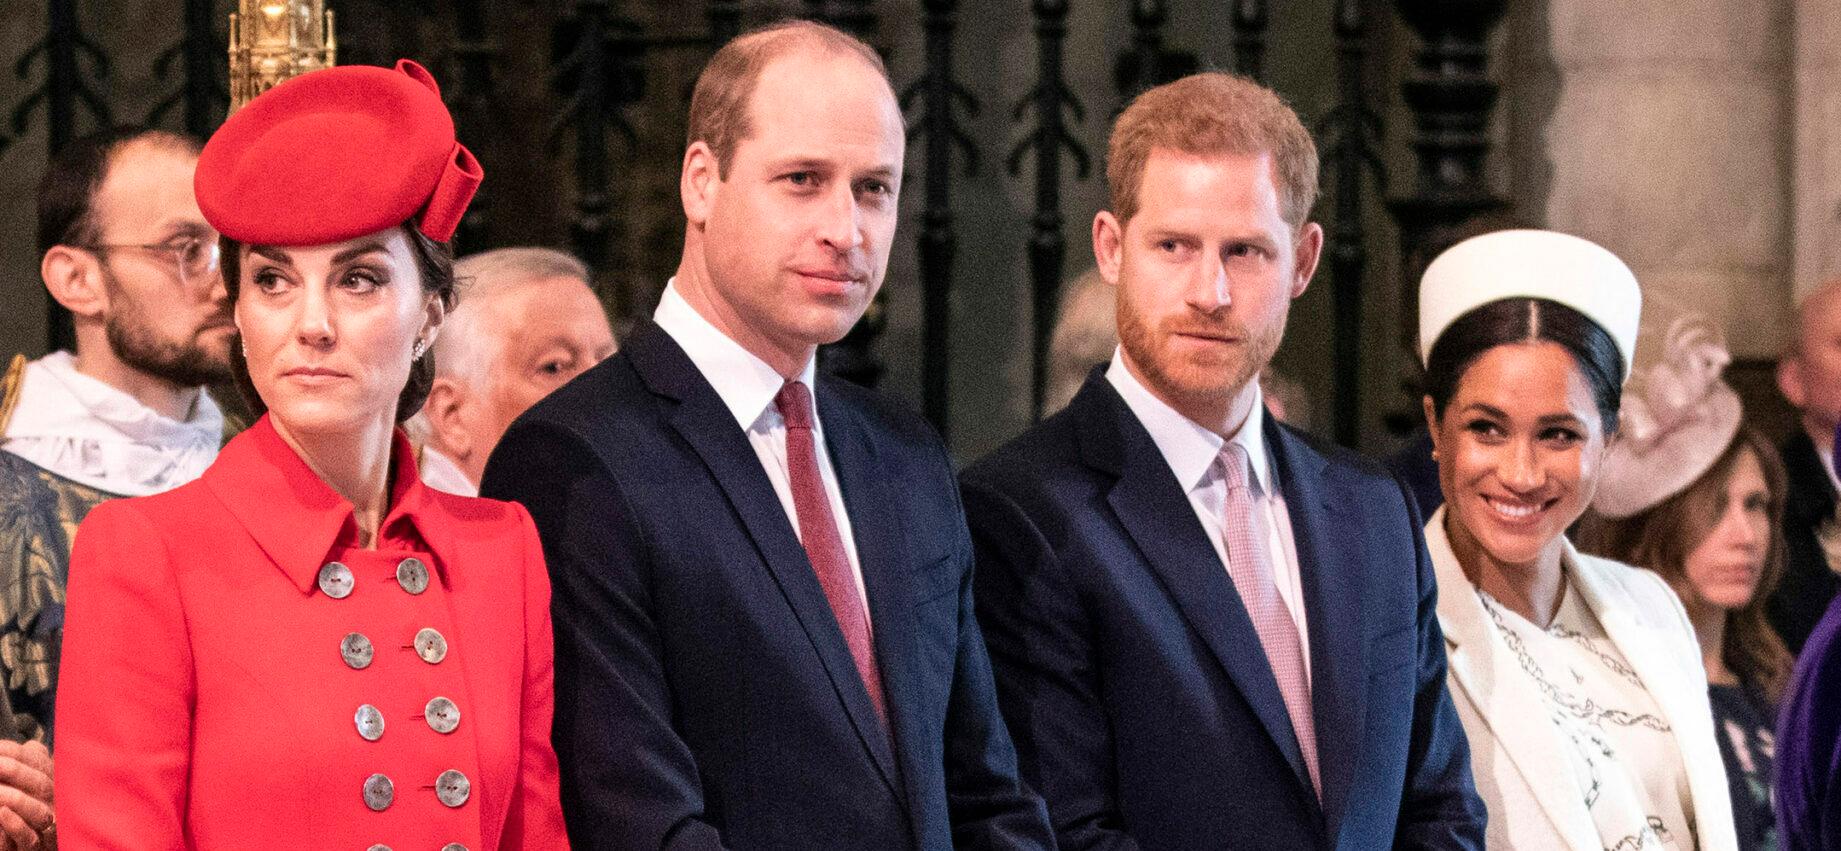 Harry & Meghan Reportedly Won’t Be ‘Welcomed With Open Arms’ If They Visit Royals For Christmas